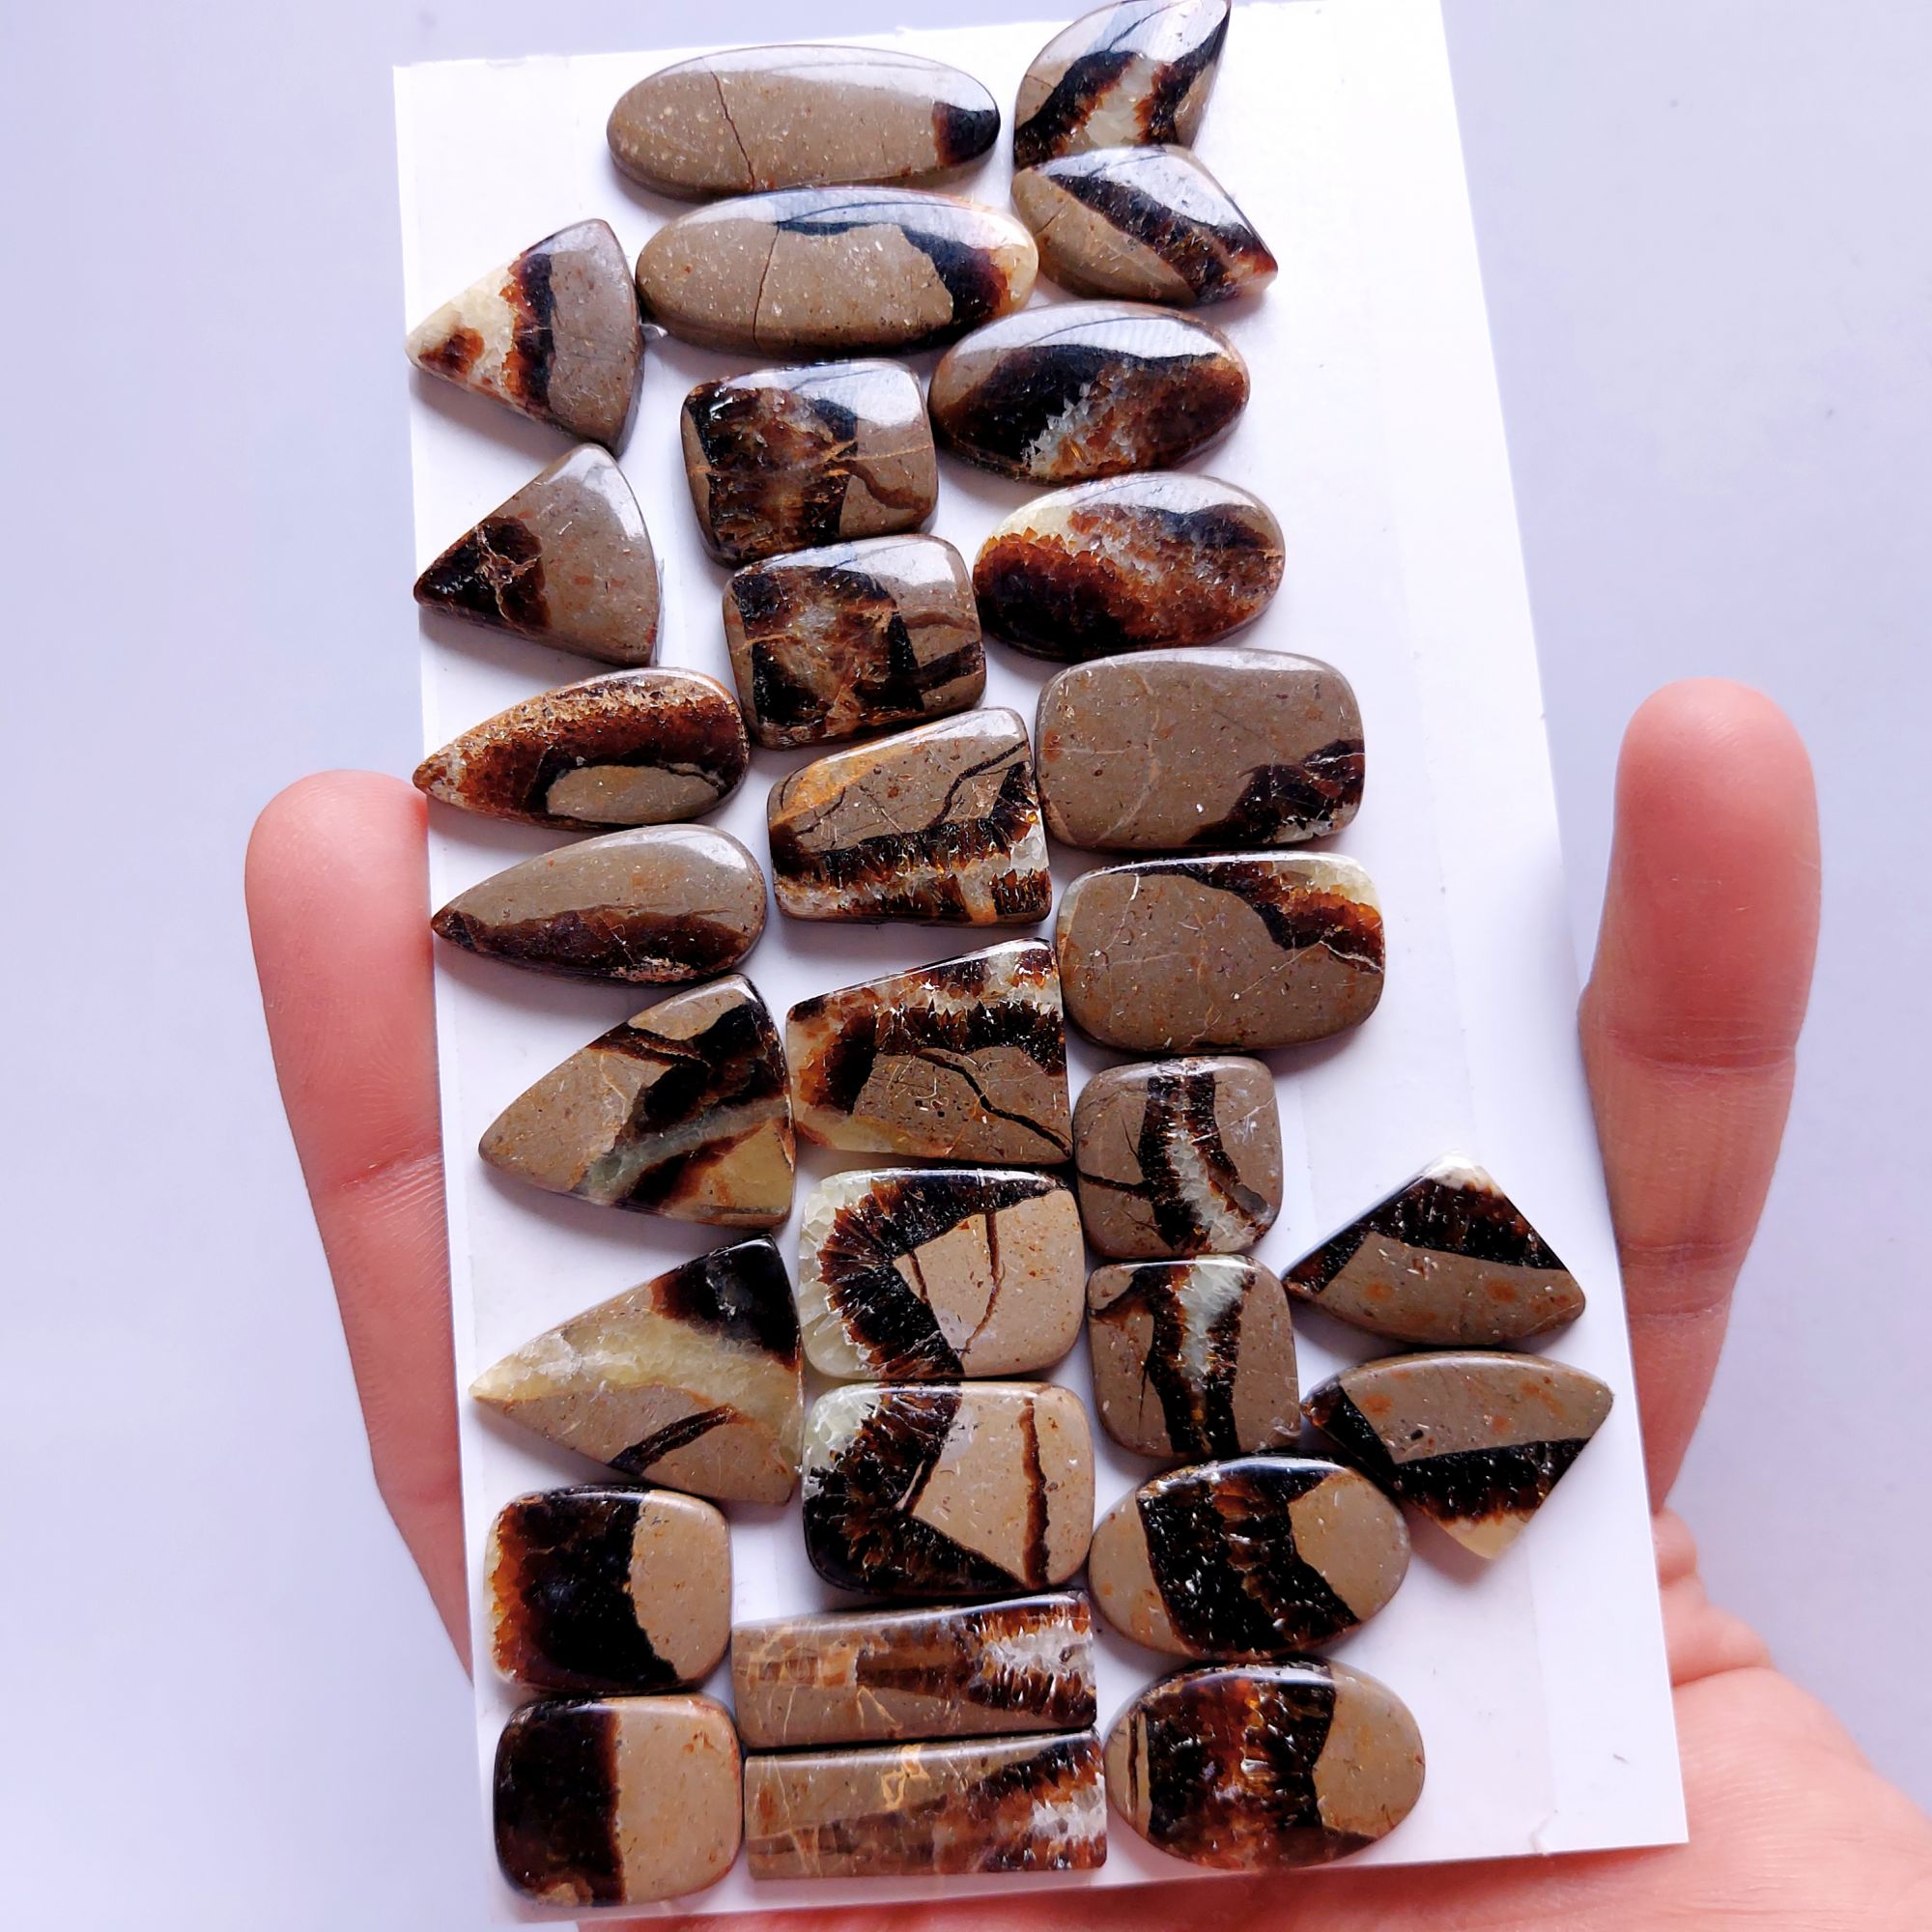 15 Pair 325Cts Natural Septarian Cabochon Pair Loose Gemstone For Jewelry Wholesale Lot Size 28x12 17x14mm